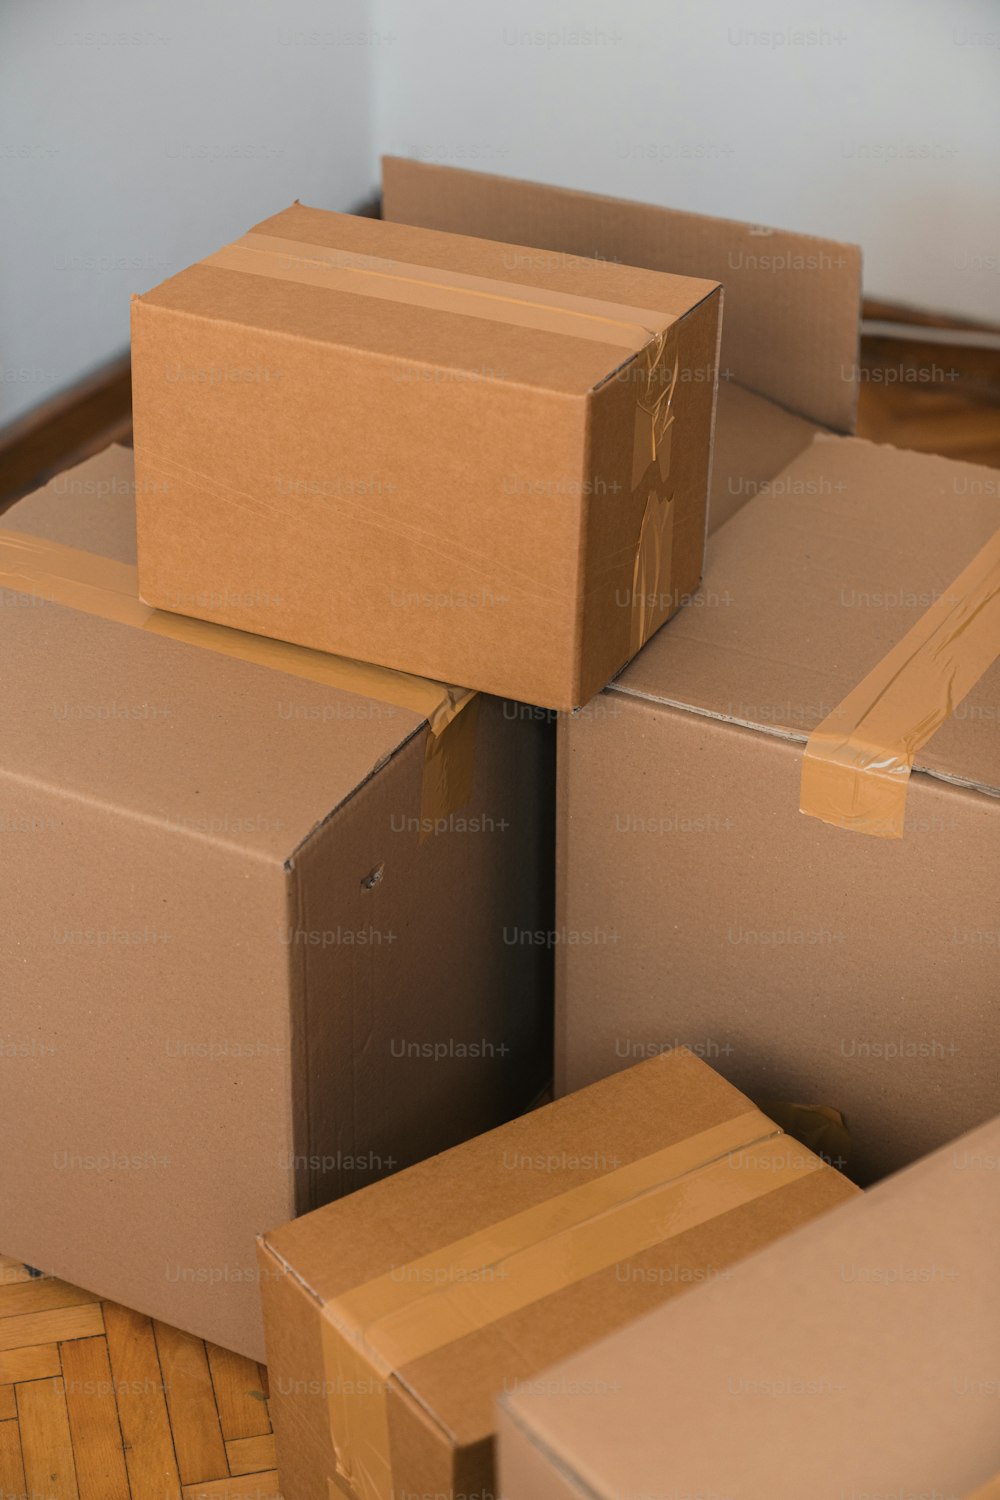 a pile of cardboard boxes sitting on top of a wooden floor